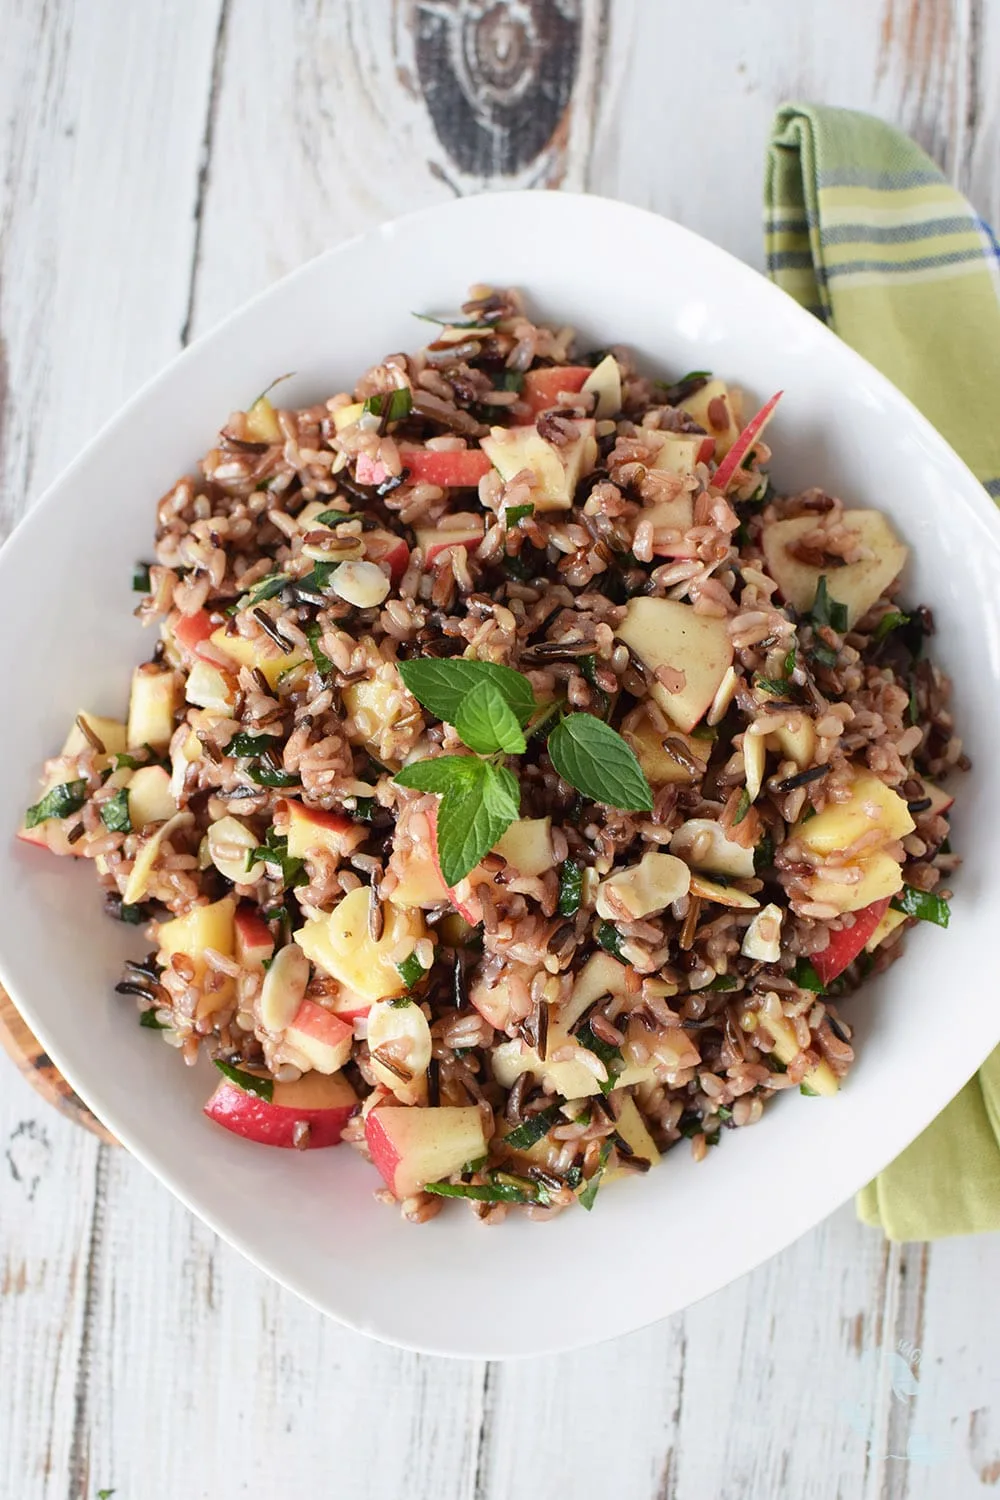 Wild rice salad with apples, honey, and mint